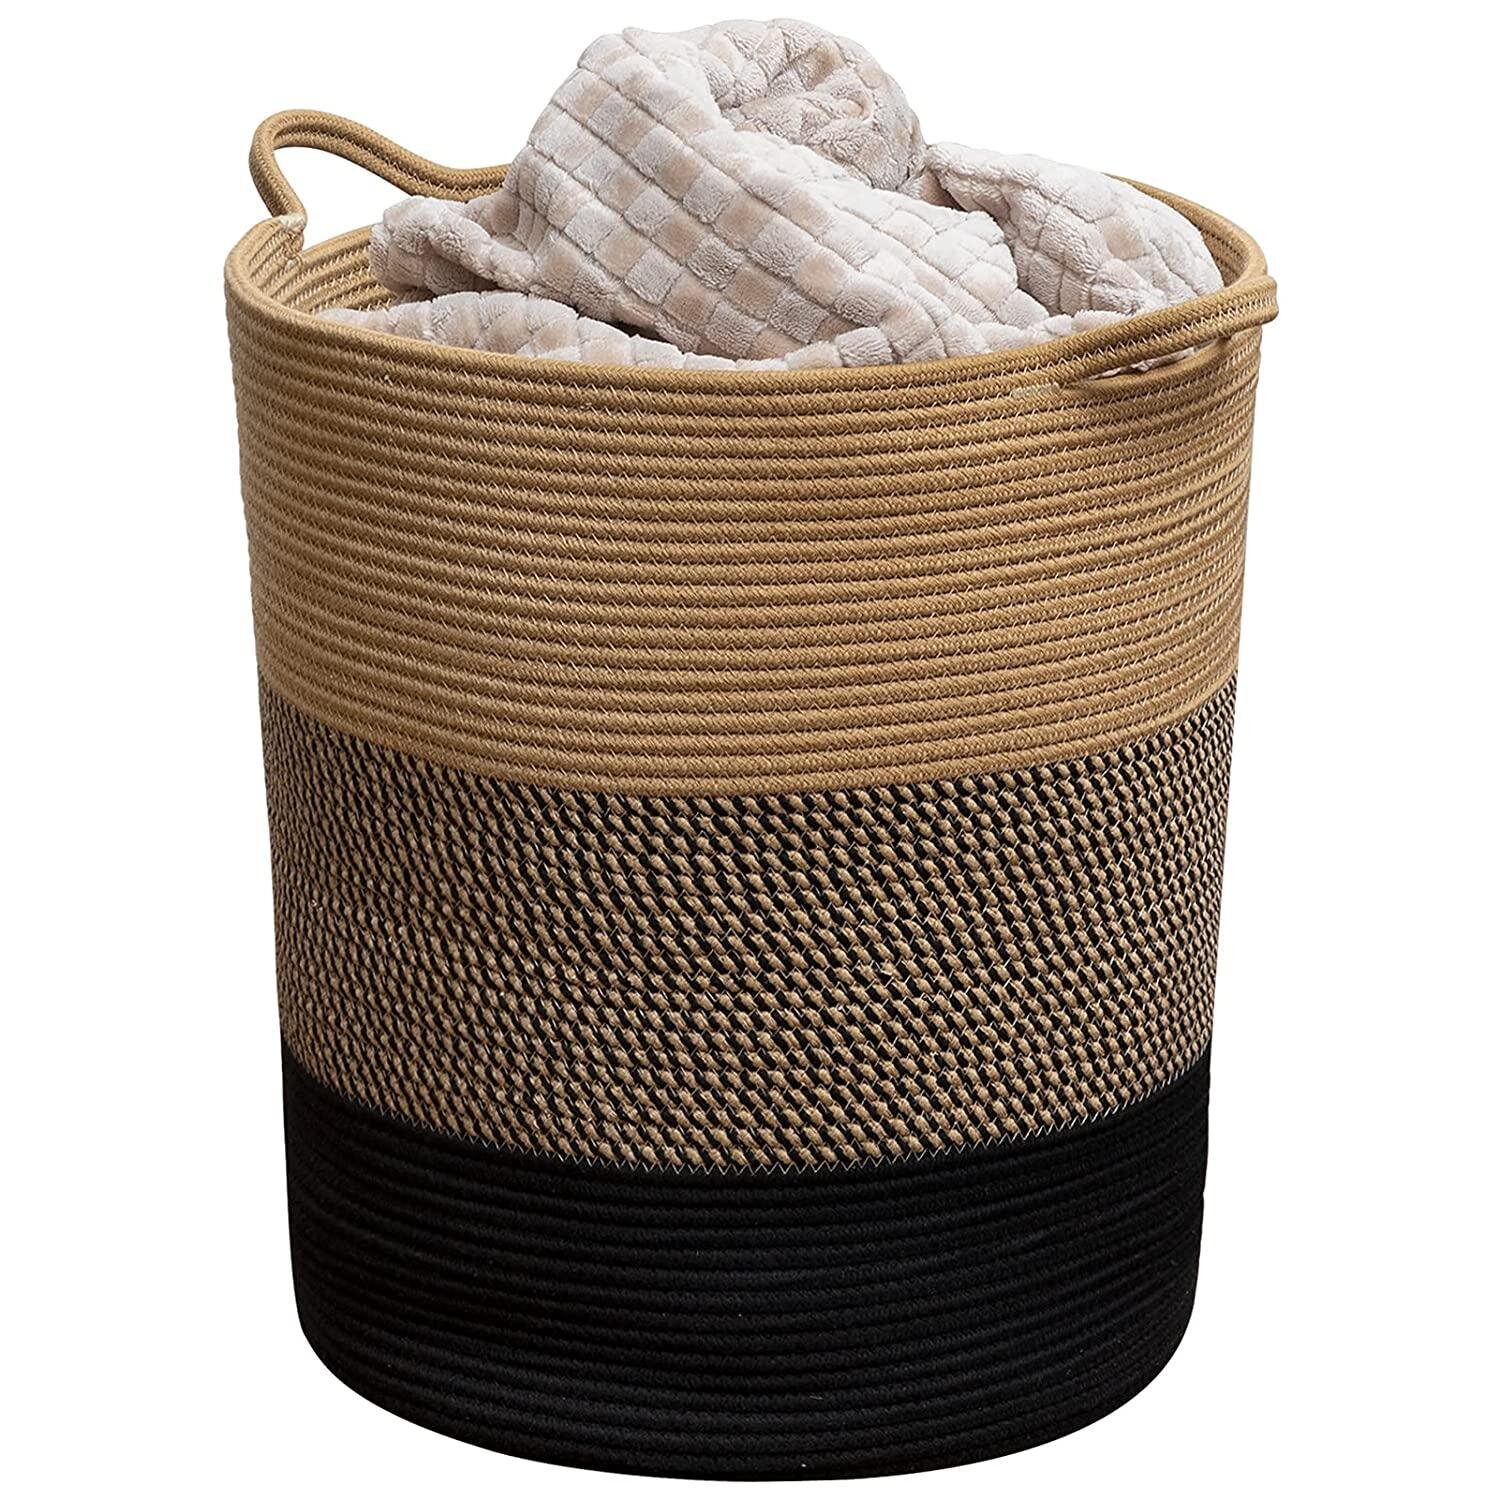 Tall Gray White Cotton Rope Laundry Basket for Girls Mono Living Boho Decor Organizing Nursery Rope Basket for Storage Baby Toy Room Bedroom Organizers and Storage Soft Modern Wide Laundry Basket 